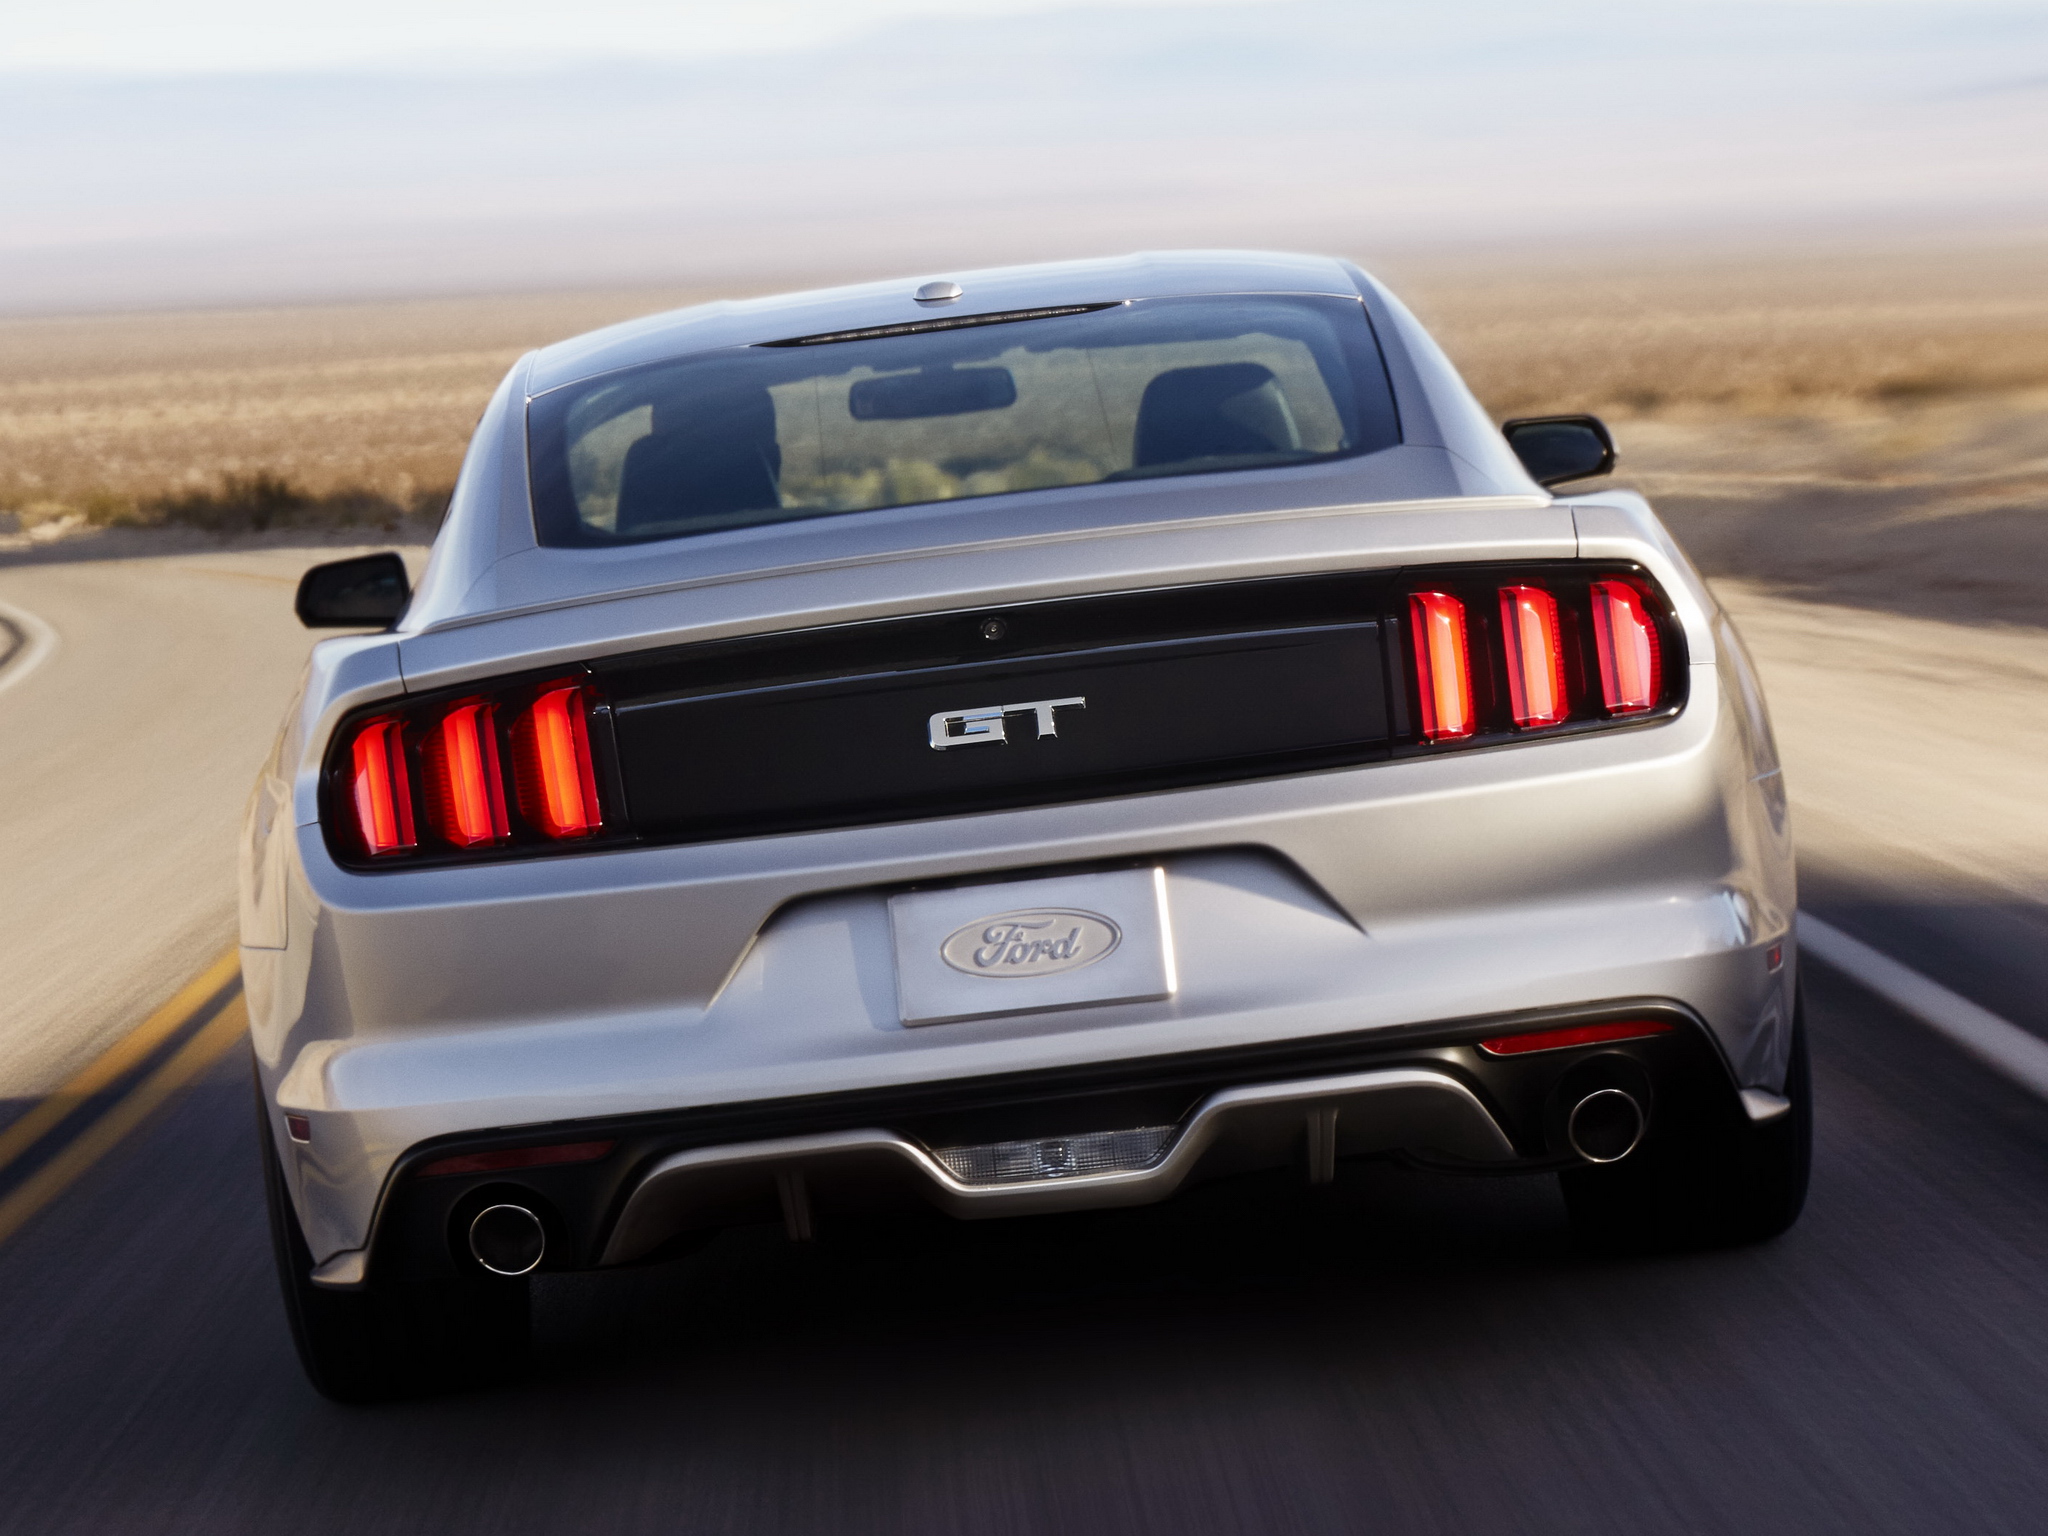 2014, Ford, Mustang, G t, Muscle Wallpaper